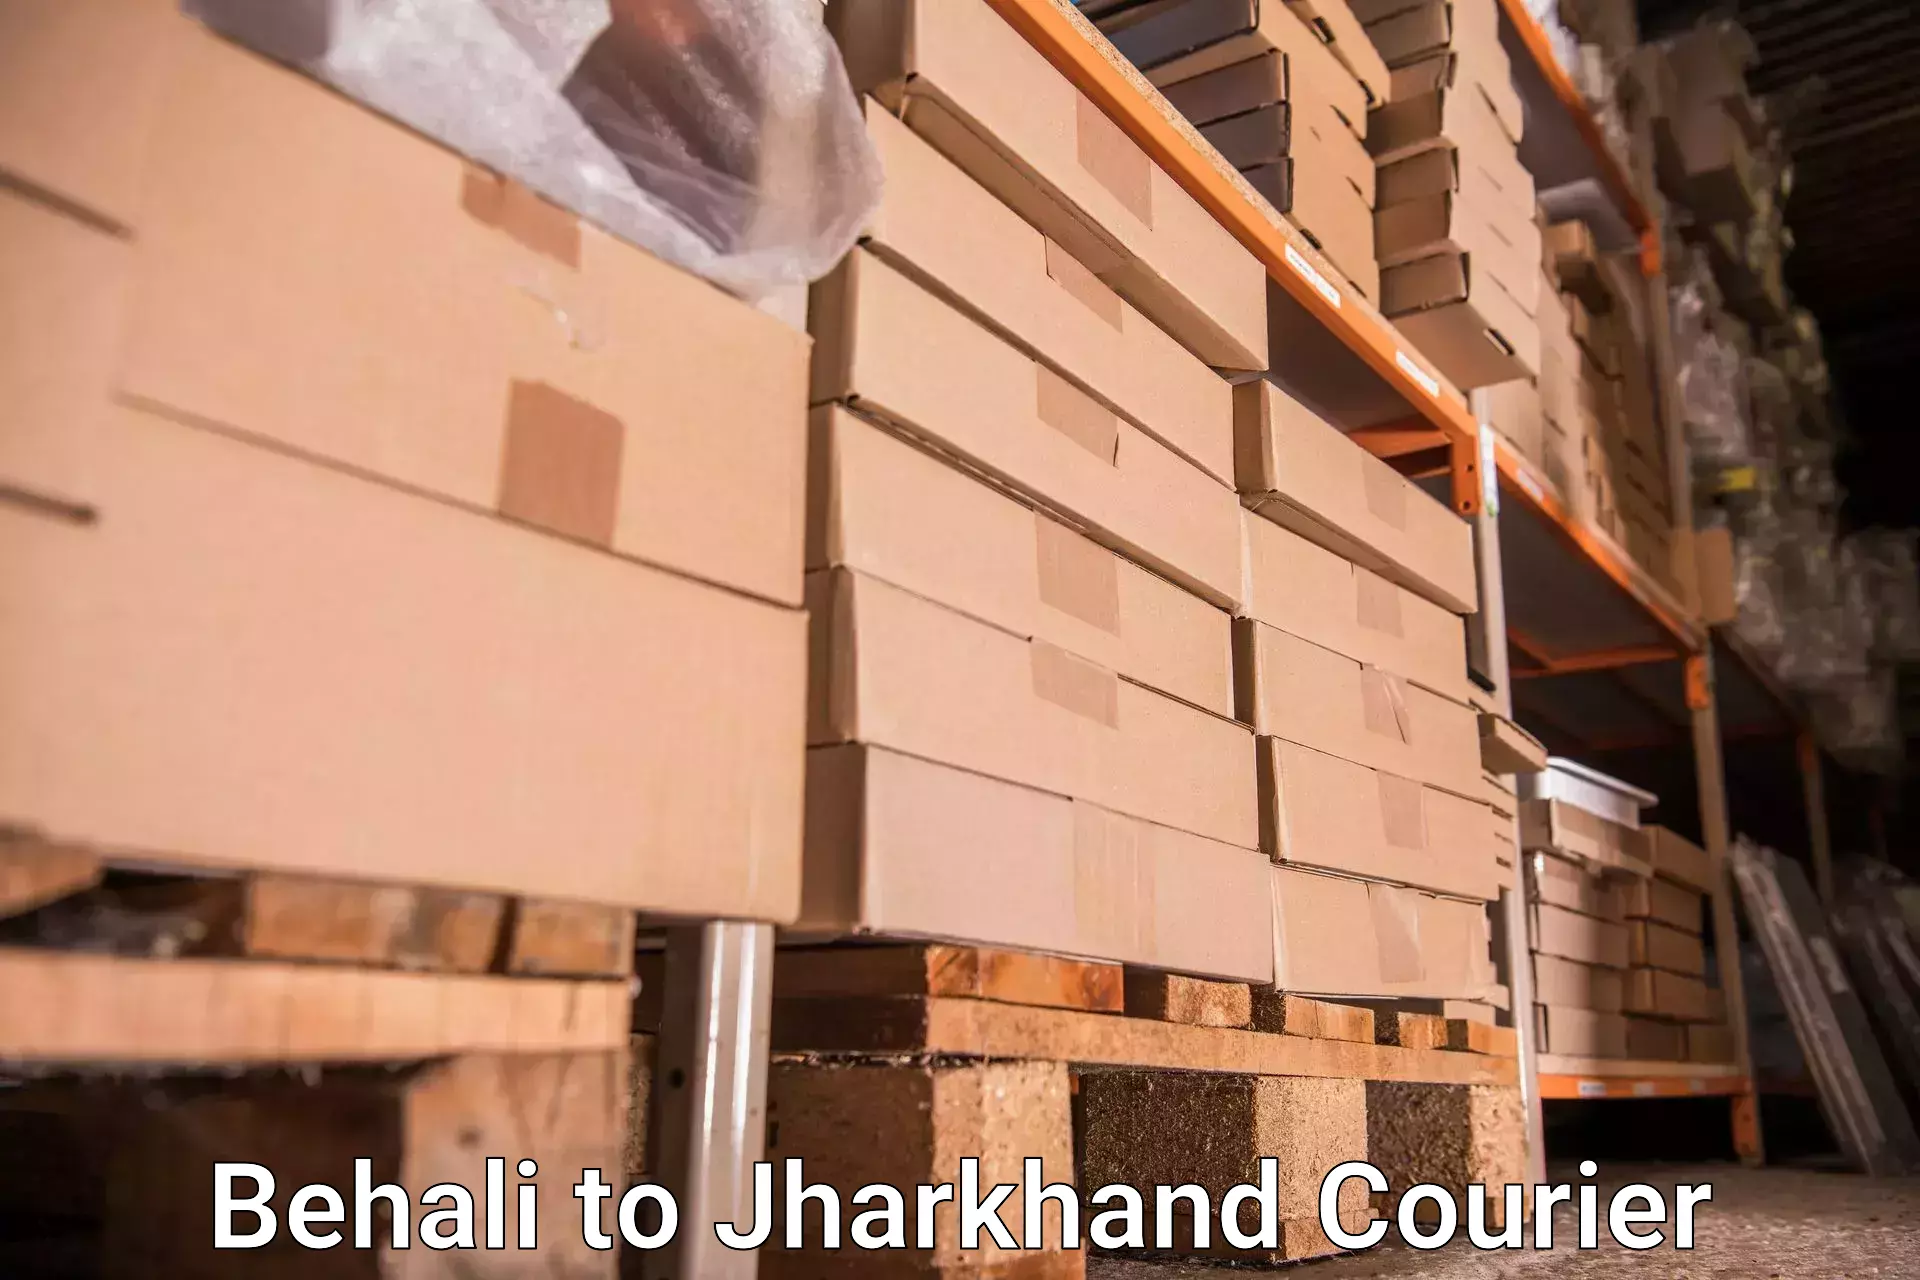 Baggage transport professionals Behali to Jharkhand